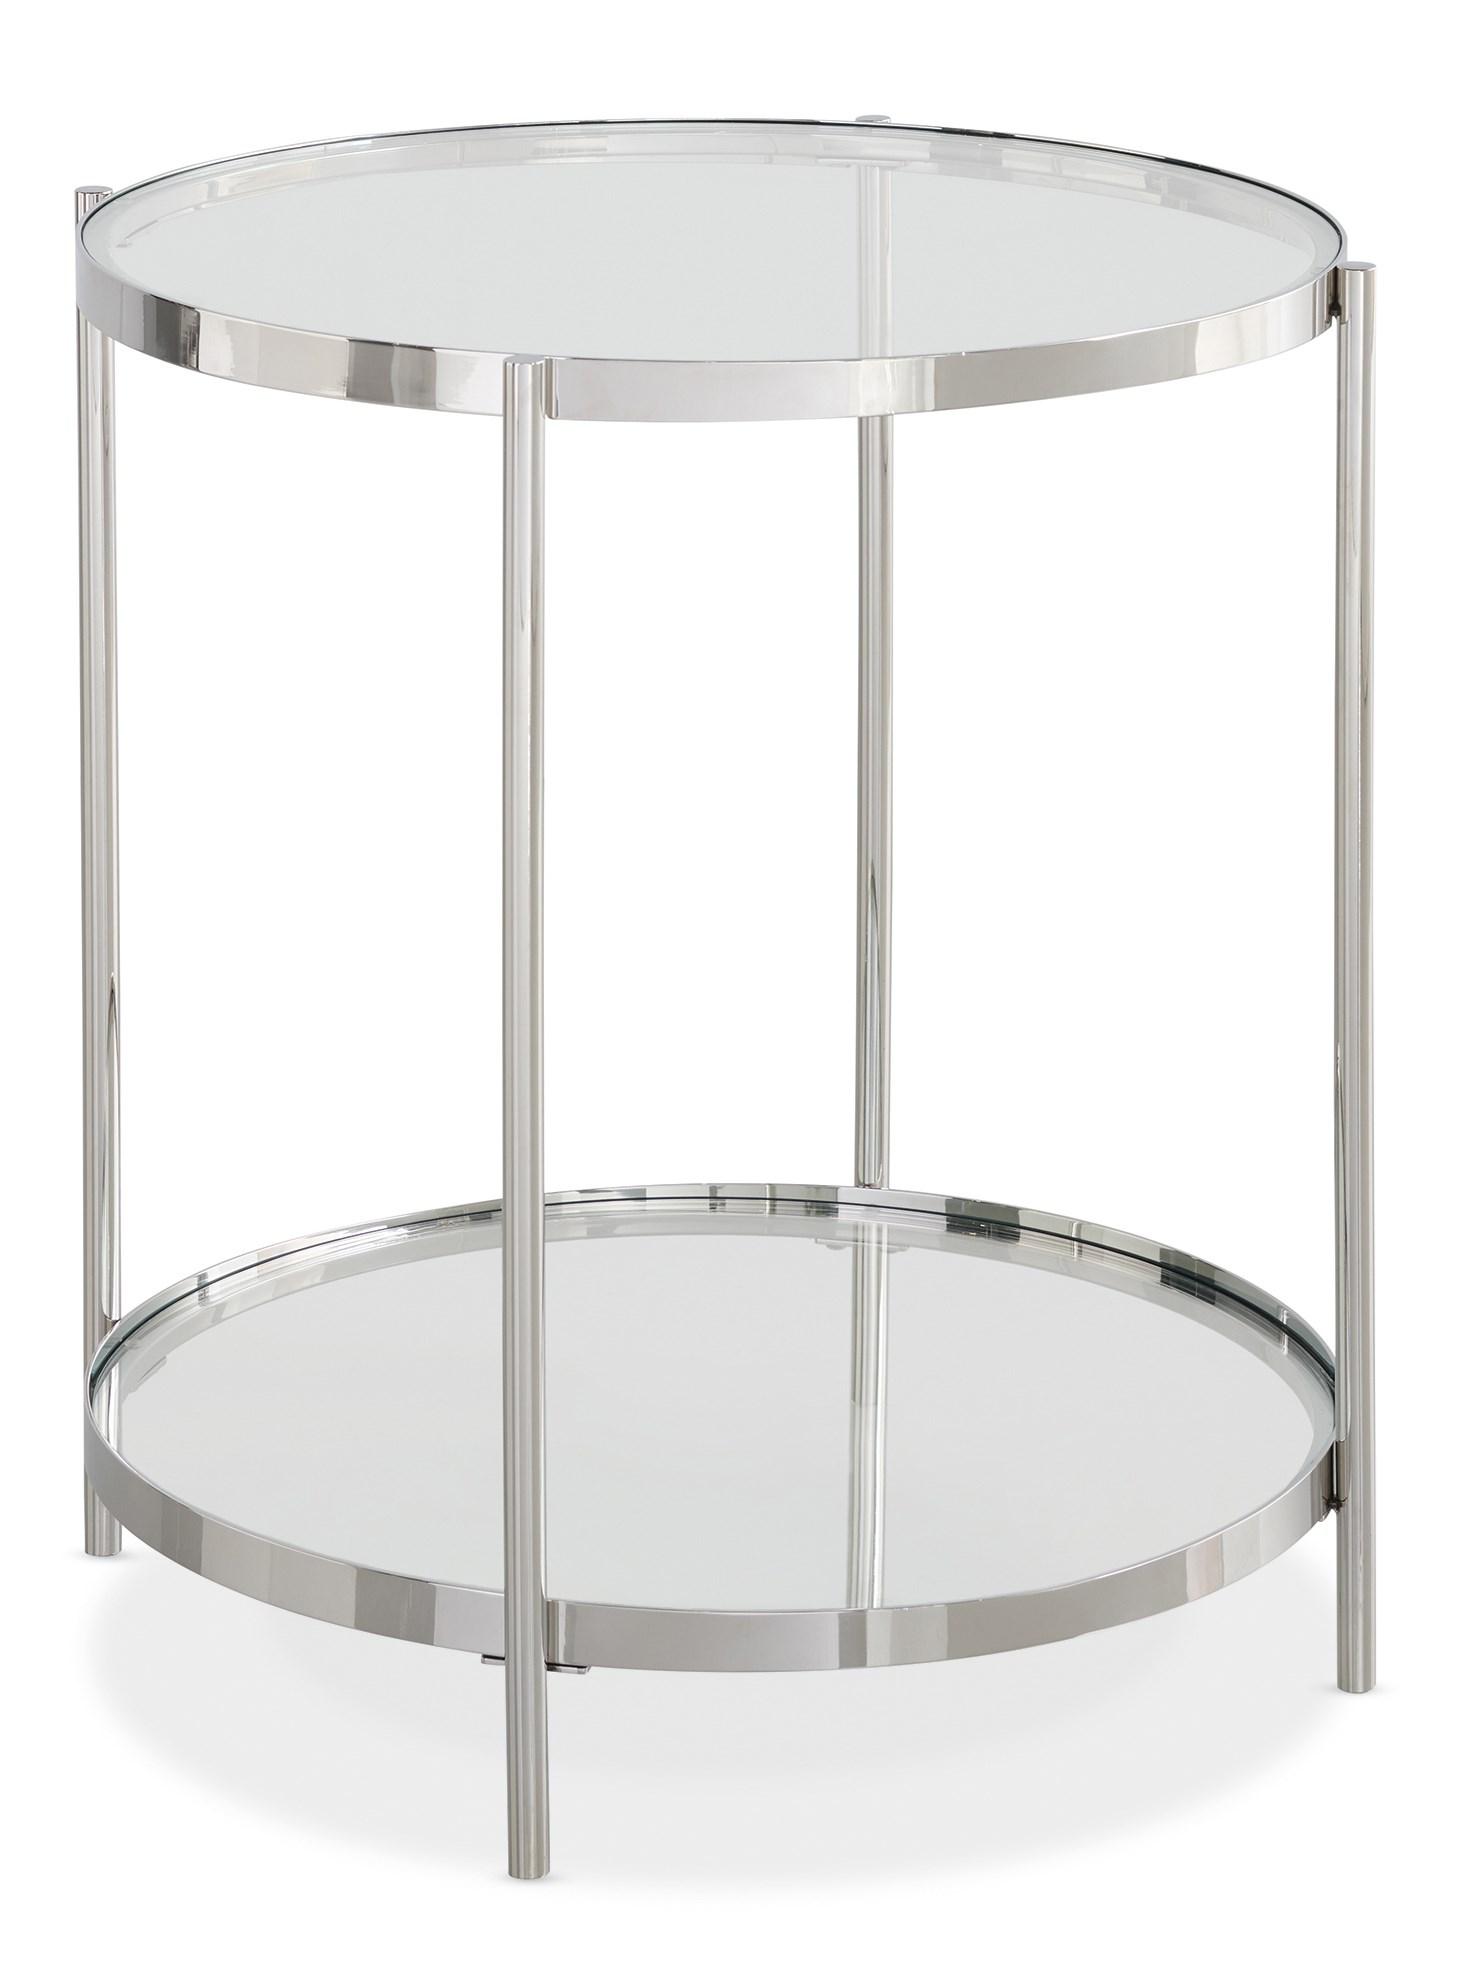 Contemporary End Table ROUND END TABLE 9261-020-411 in Silver 